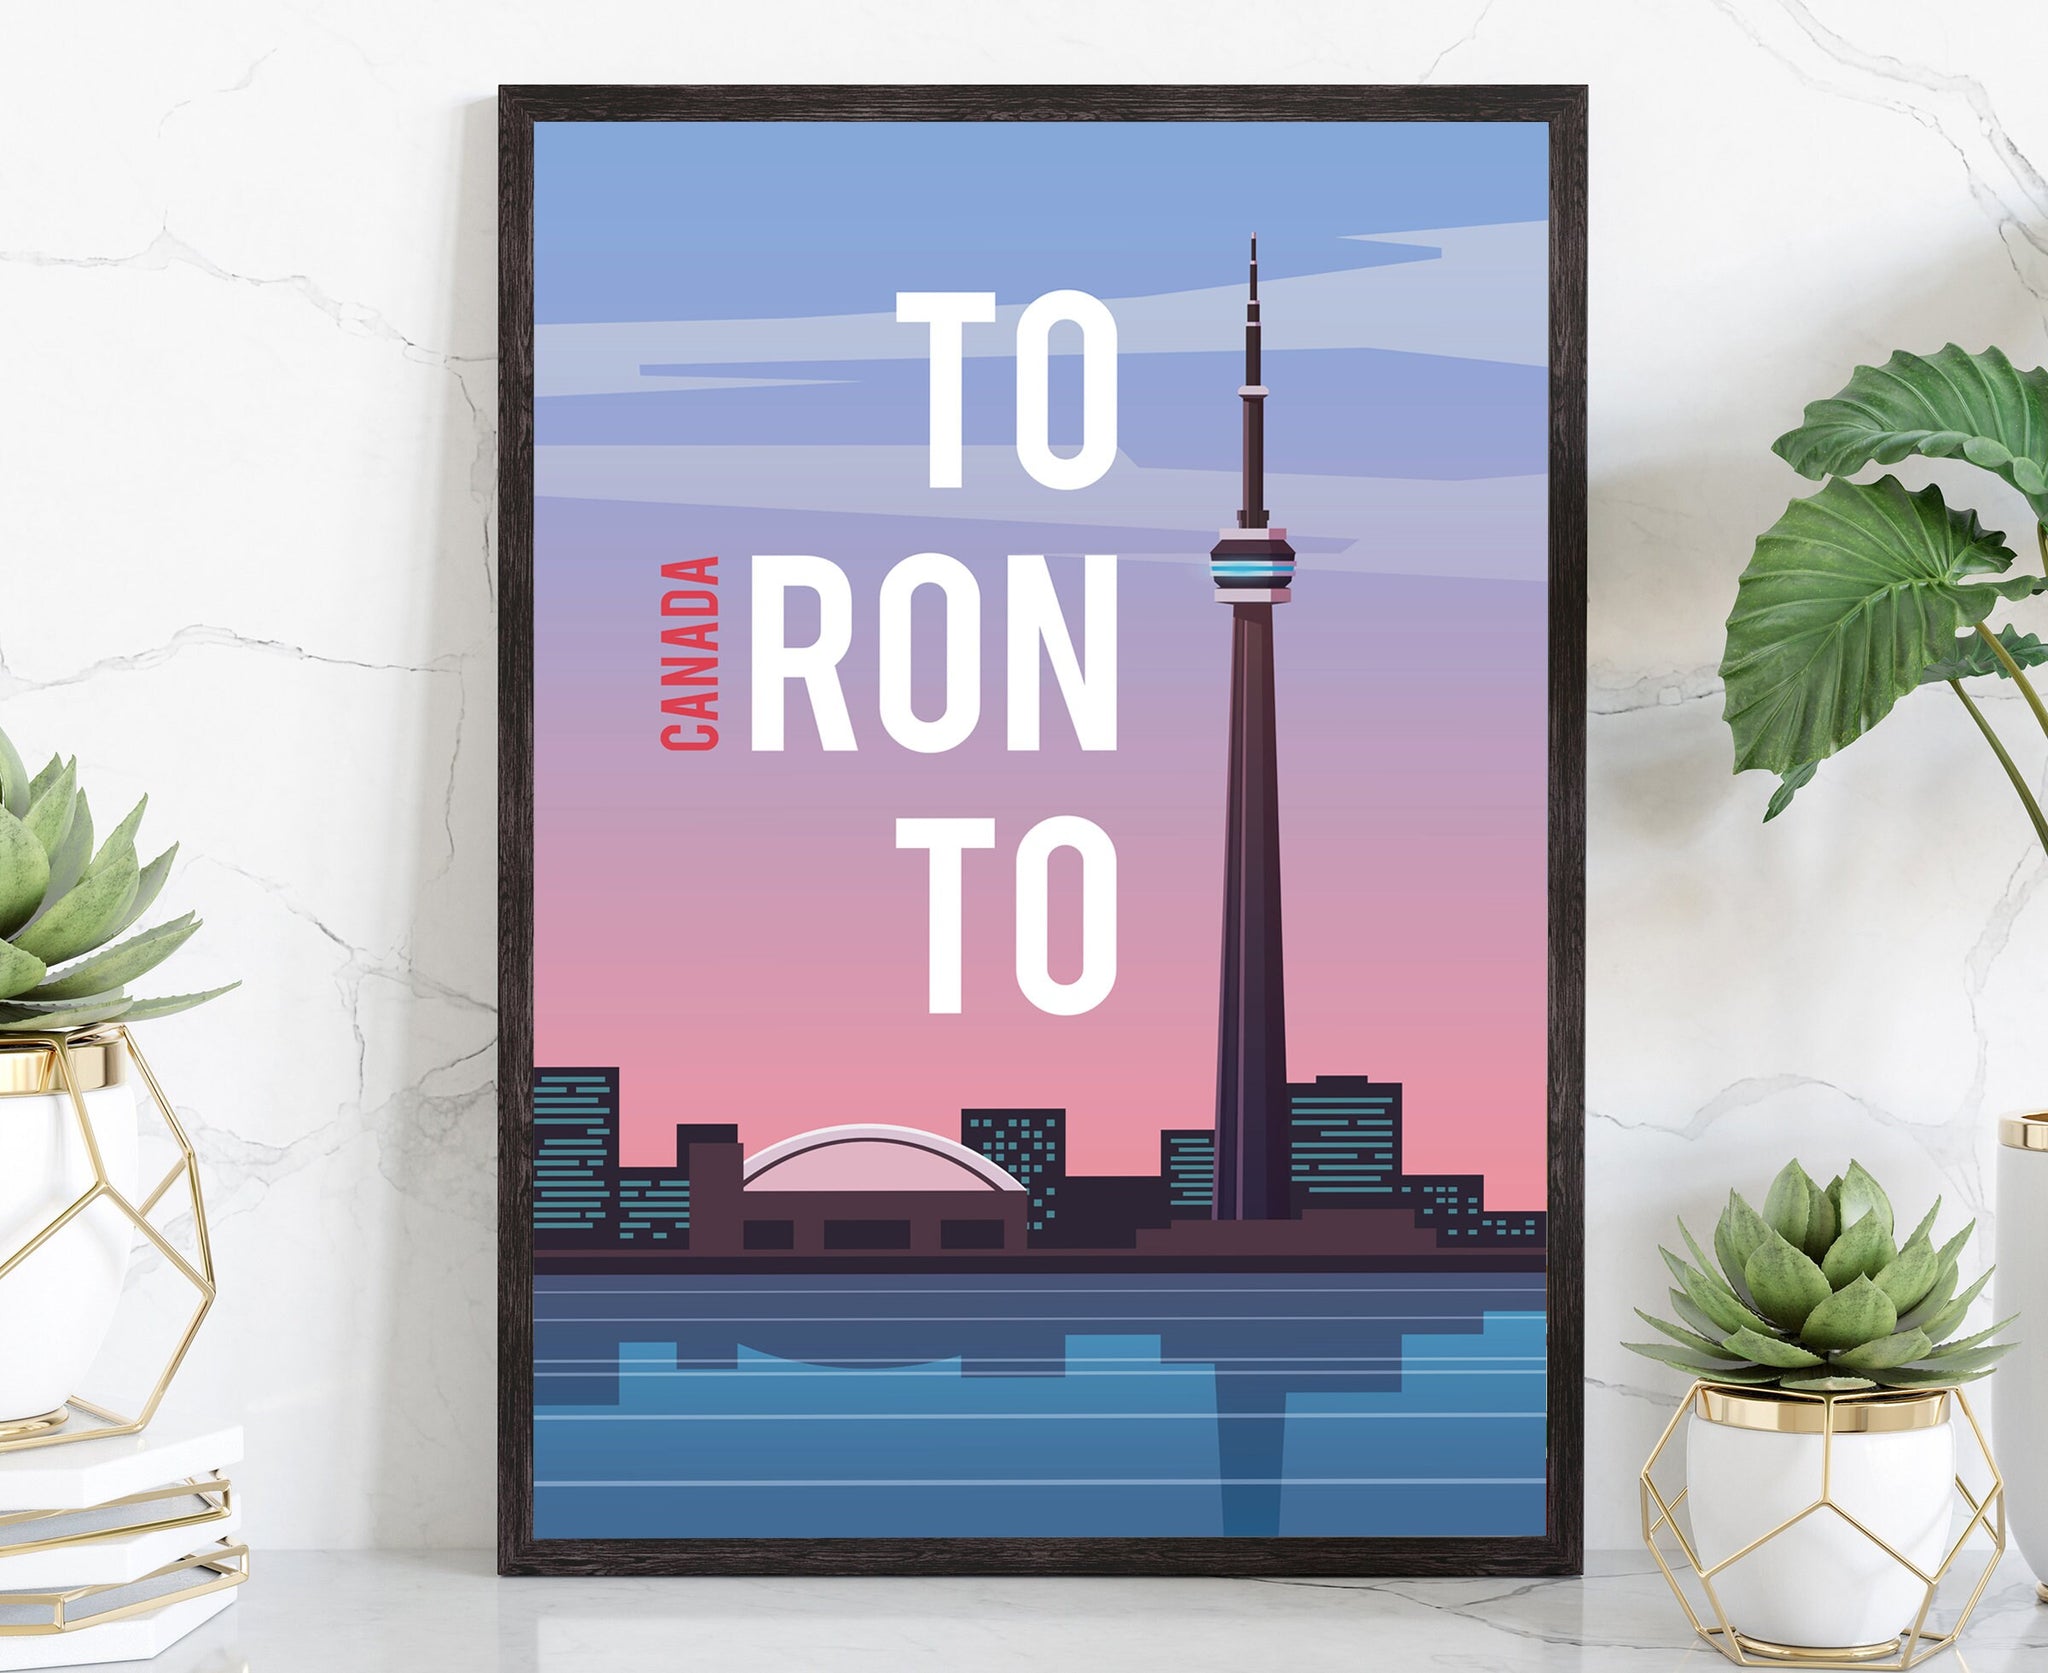 Retro Style Travel Poster, Canada Toronto Vintage Rustic Poster Print, Home Wall Art, Office Wall Decor, Posters, City Map Travel Posters